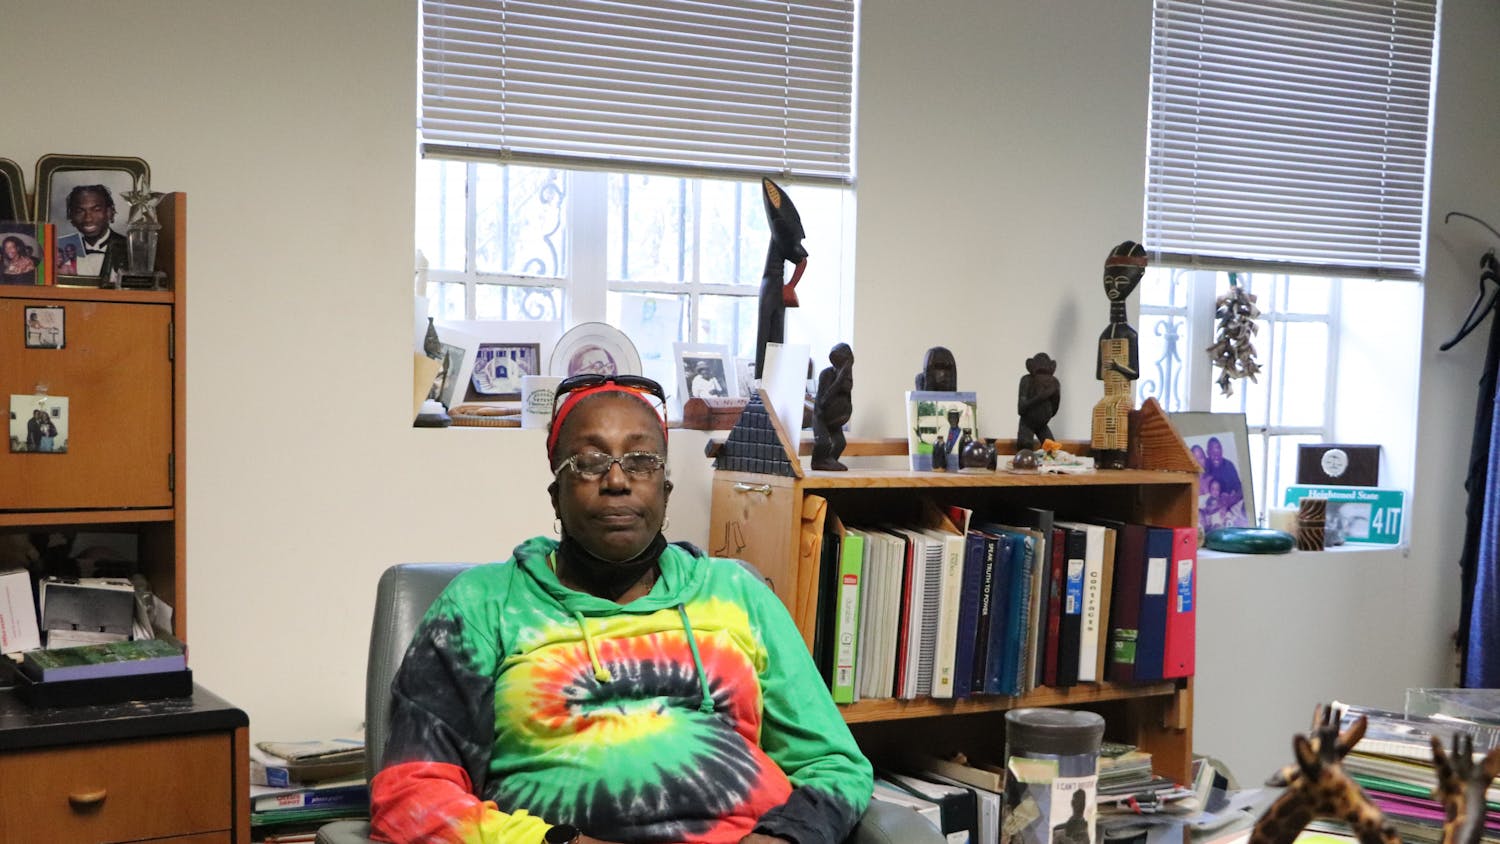 NKwanda Jah sits in her office at Wilhelmina Johnson Center on Wednesday, Feb. 16, 2022. Jah runs an afterschool science program from her office.